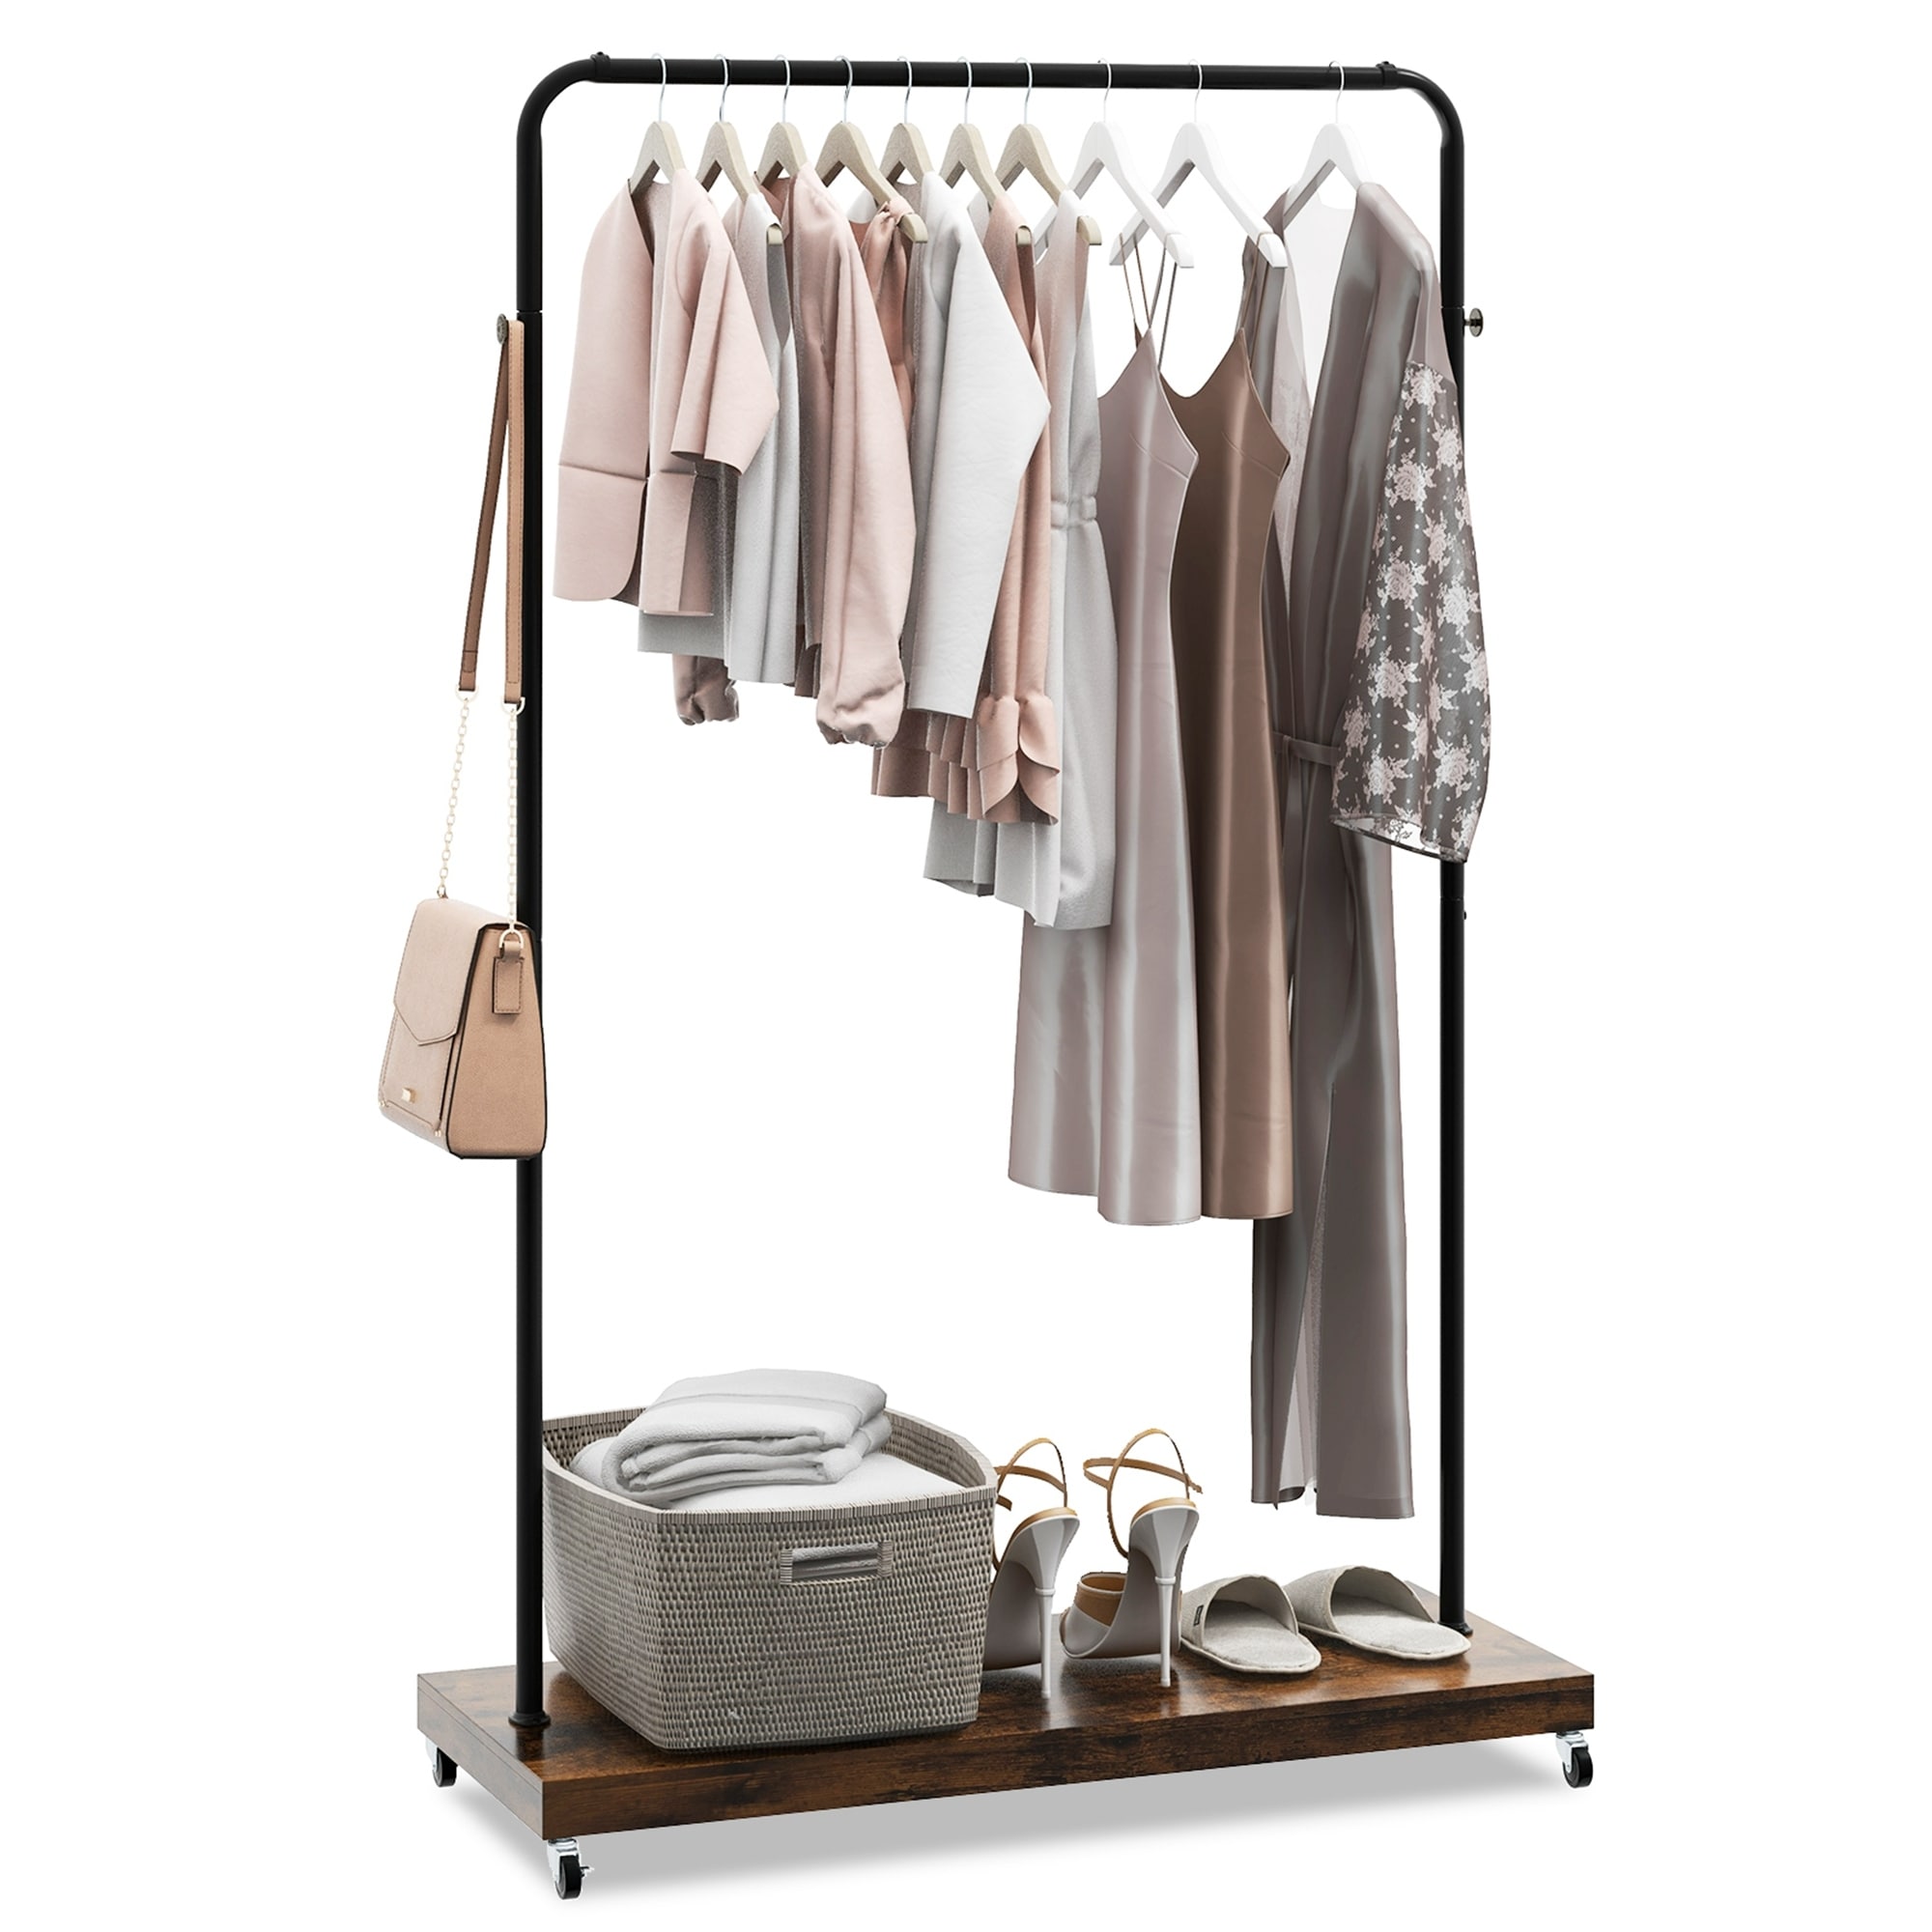 SONGMICS Industrial Pipe Clothes Rack Bundle with 50 Clothes Hangers,  Rolling Garment Rack with Bottom Storage Shelf, Space-Saving Plastic  Hangers